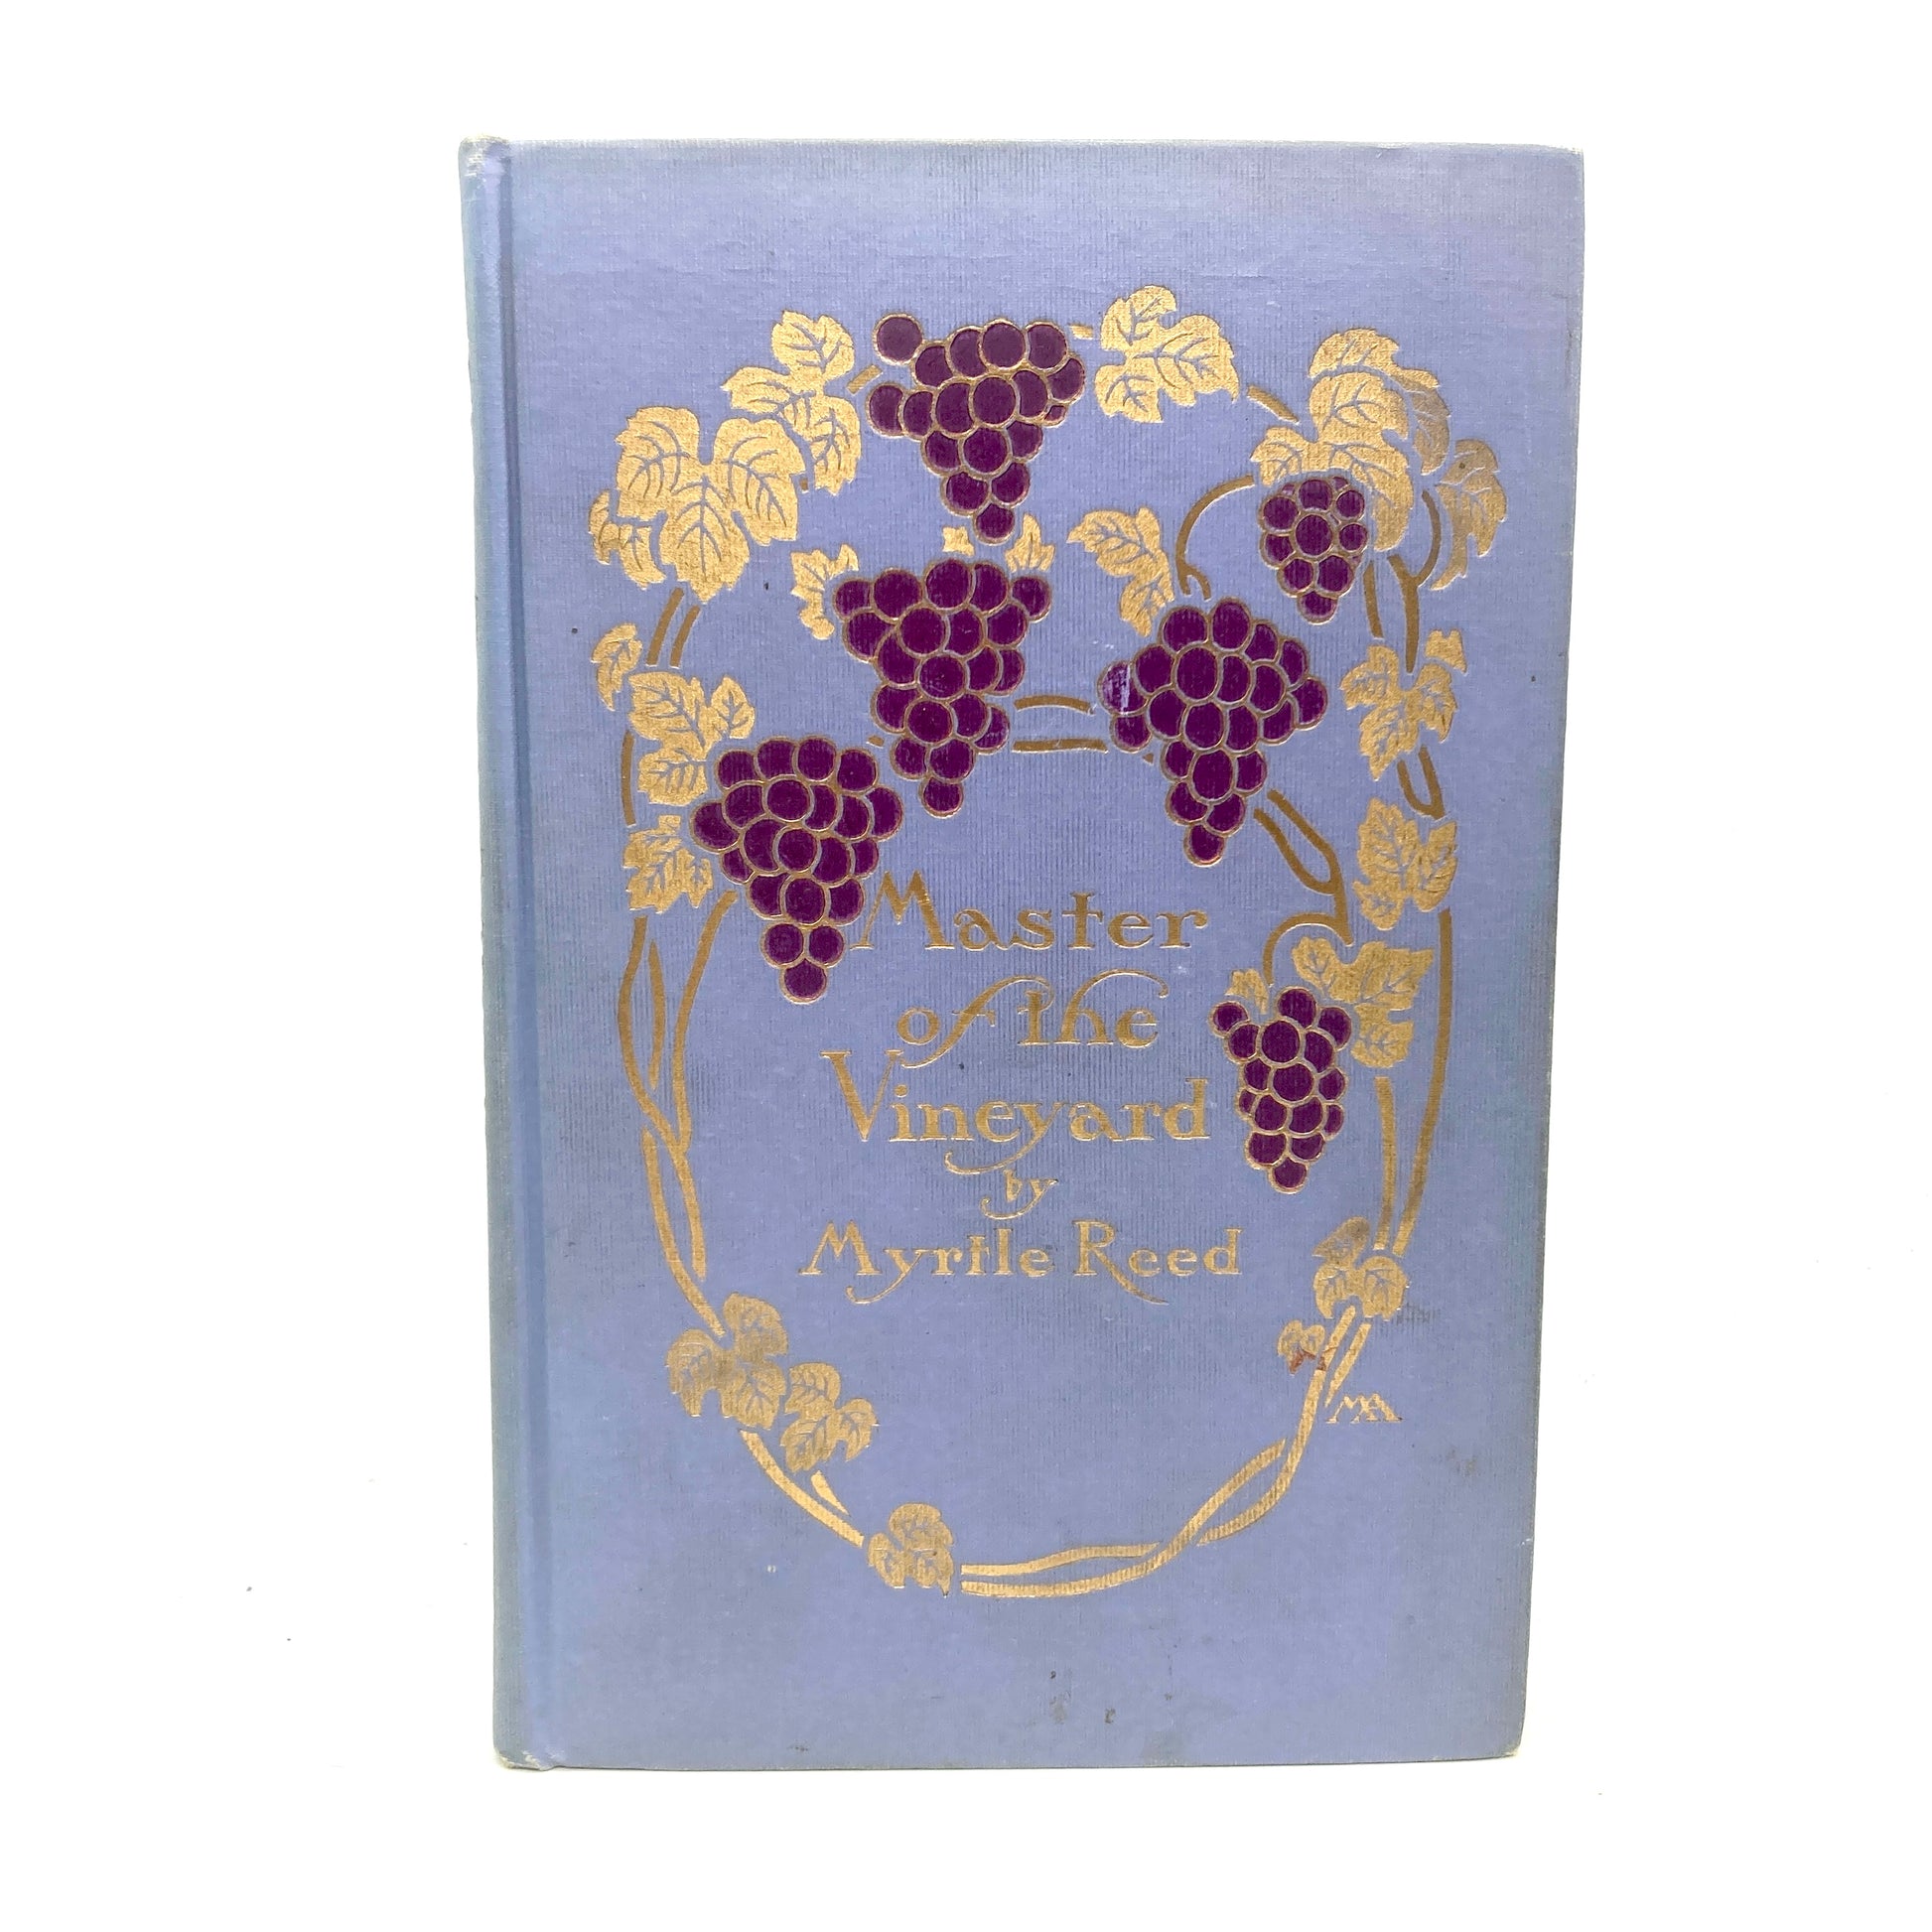 REED, Myrtle "Master of the Vineyard" [GP Putnam's Sons, 1911] Margaret Armstrong - Buzz Bookstore